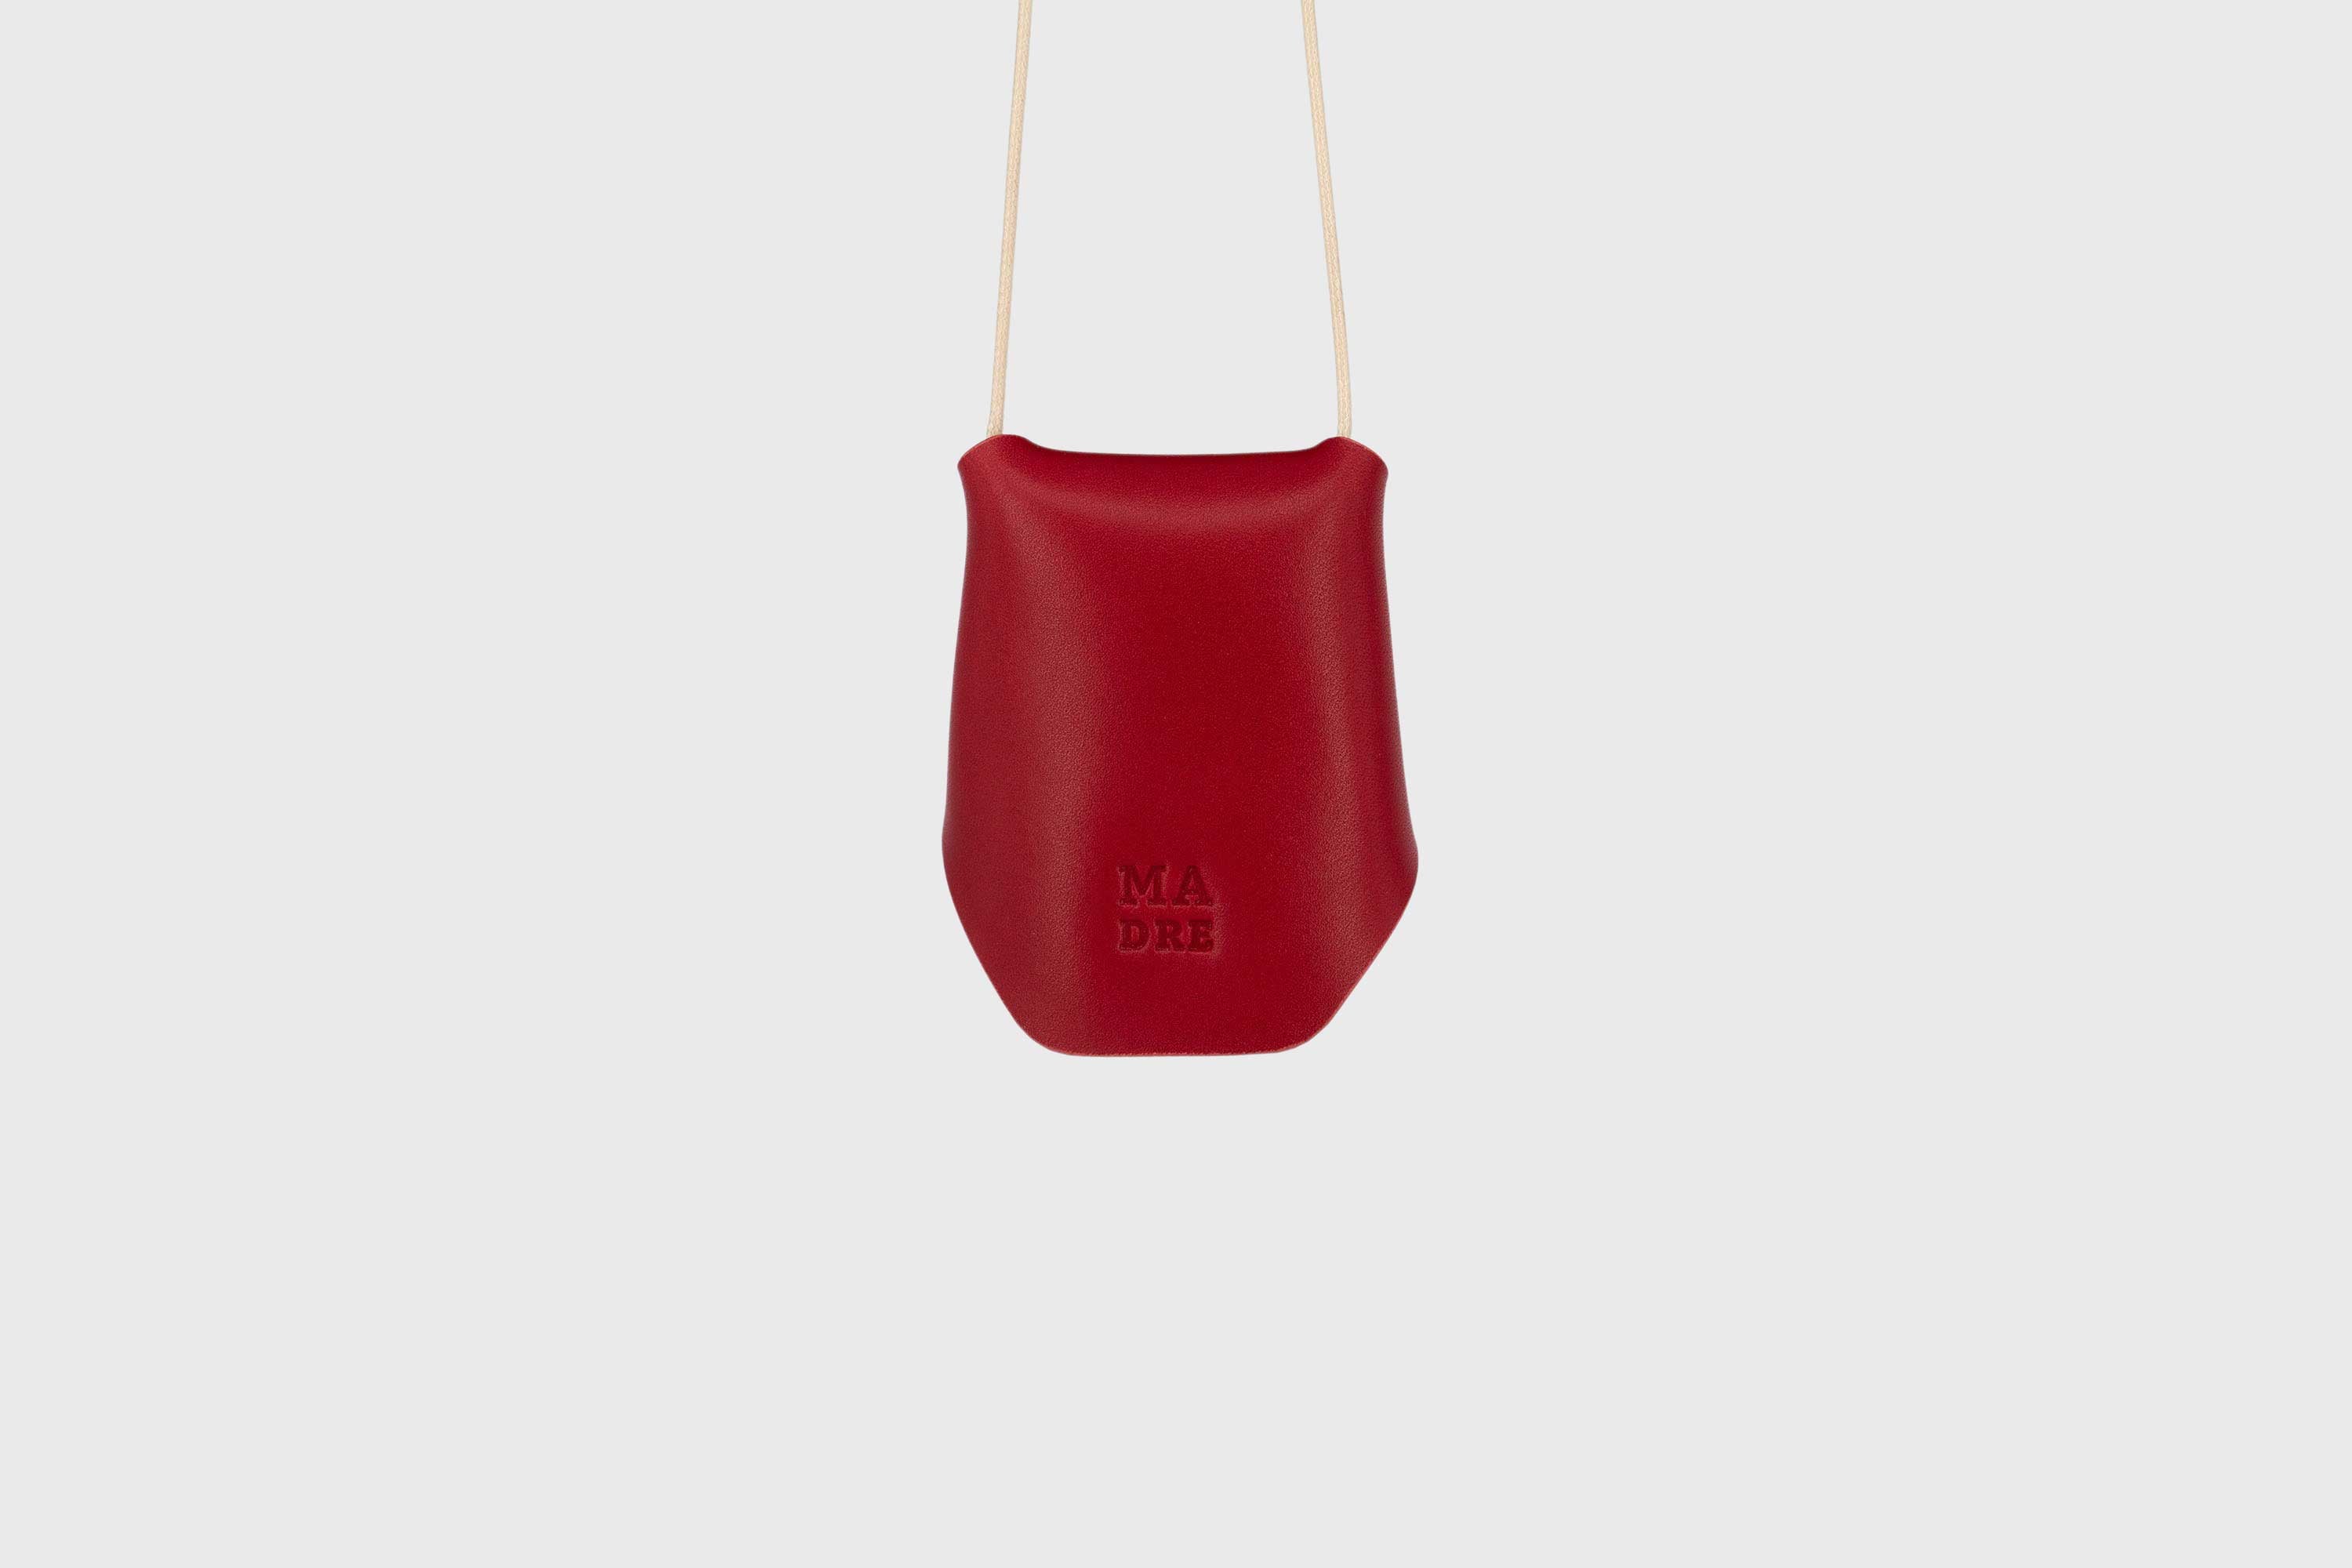 Keyhanger red color pouch leather clochette made out of vegetable tanned leather designed by atelier madre manuel dreesmann barcelona